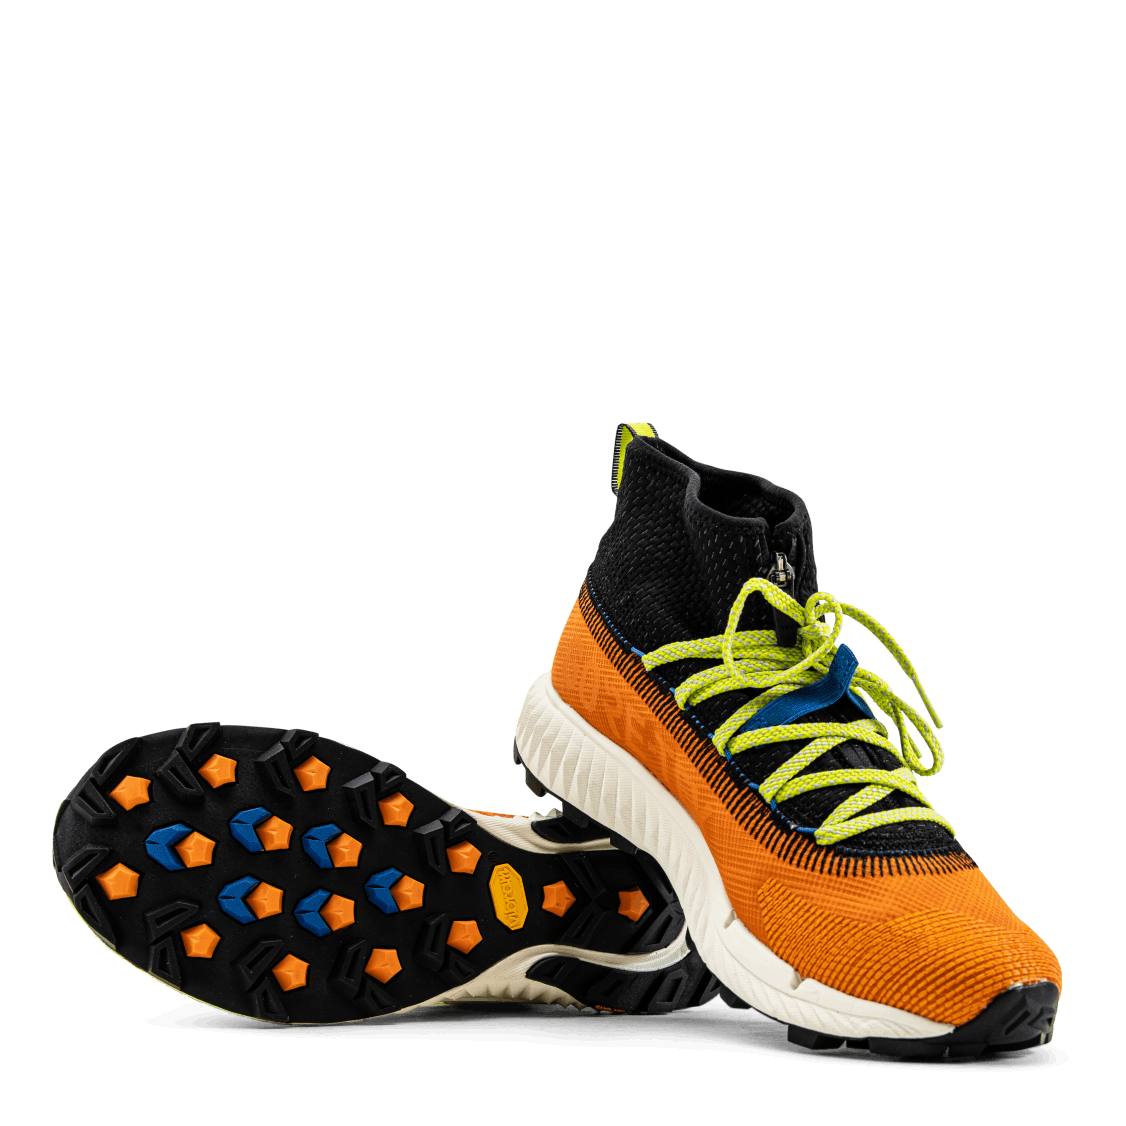 Agility Synthesis Zero GTX Patterned